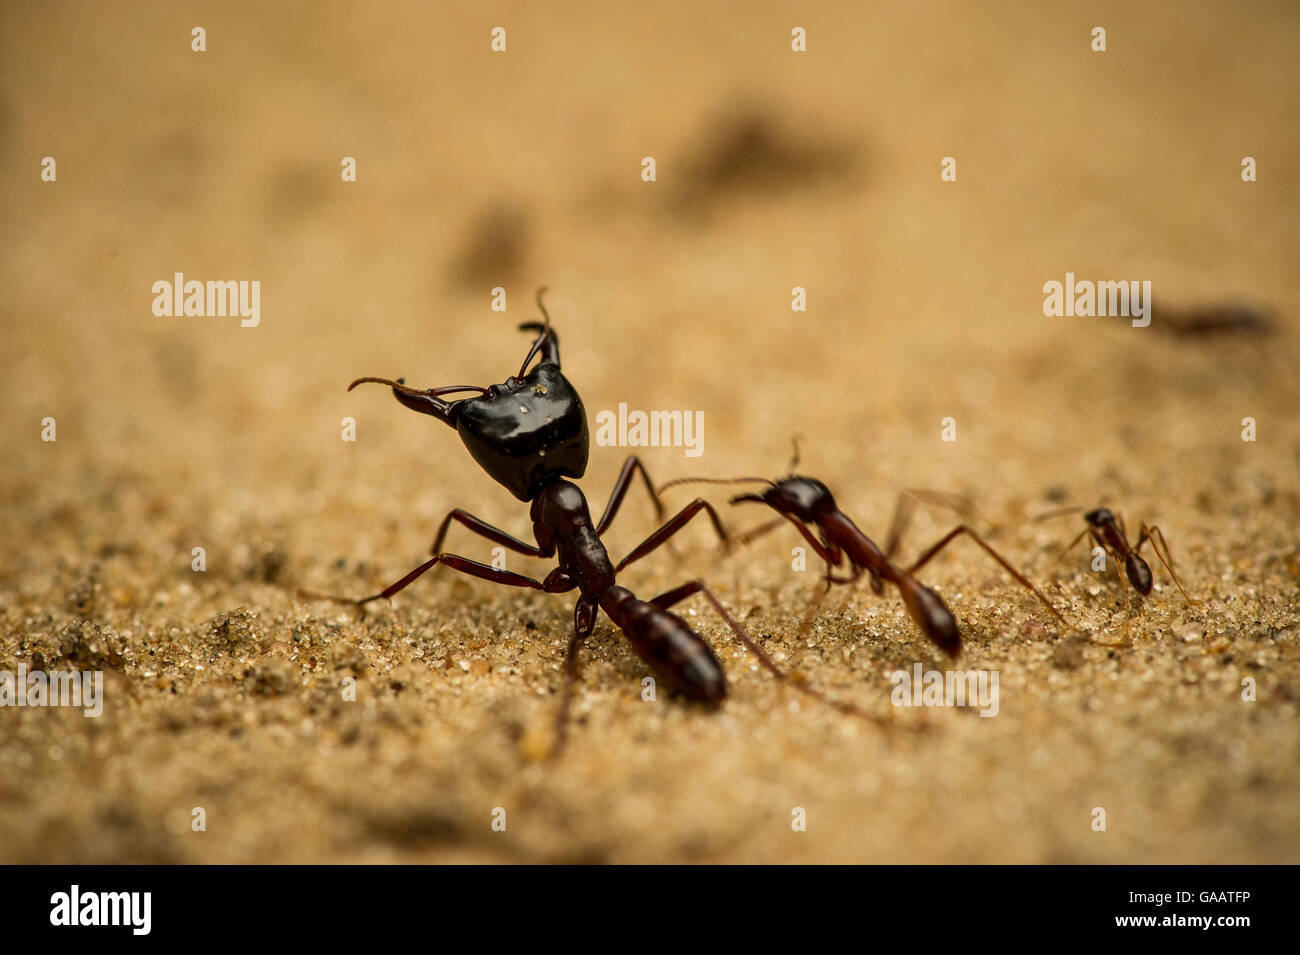 Driver ant (Dorylus) large soldier guarding smaller ants, in Salonga National Park, Democratic Republic of Congo. Stock Photo